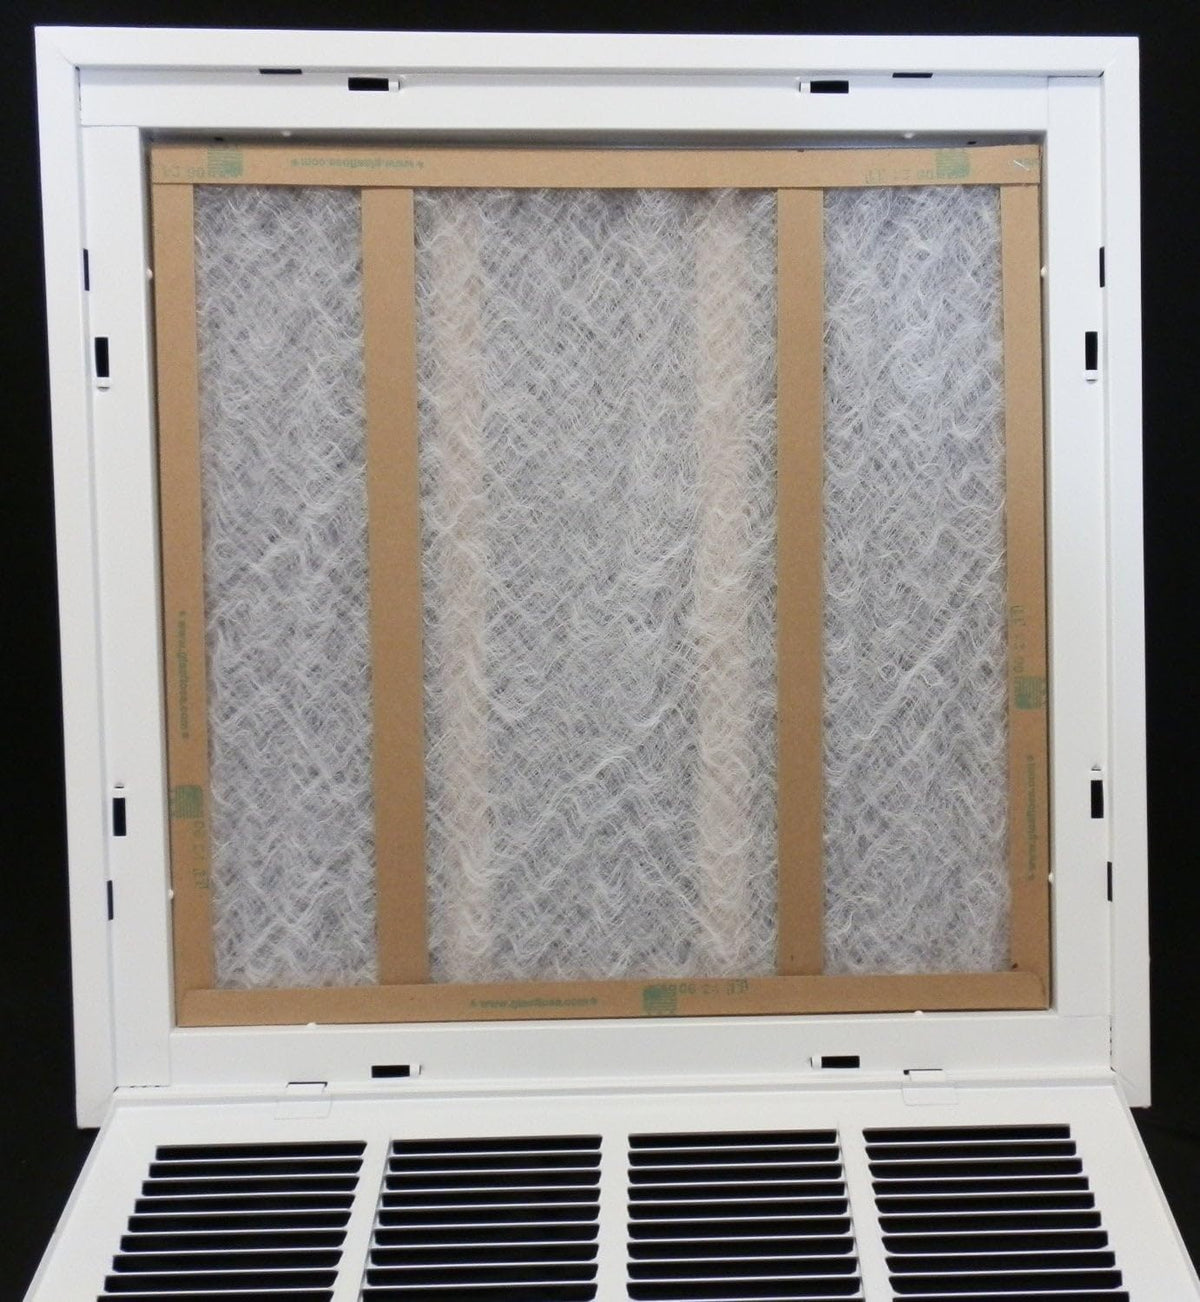 20&quot; X 25&quot; Steel Return Air Filter Grille for 1&quot; Filter - Fixed Hinged - [Outer Dimensions: 22 5/8&quot; X 27 5/8&quot;]